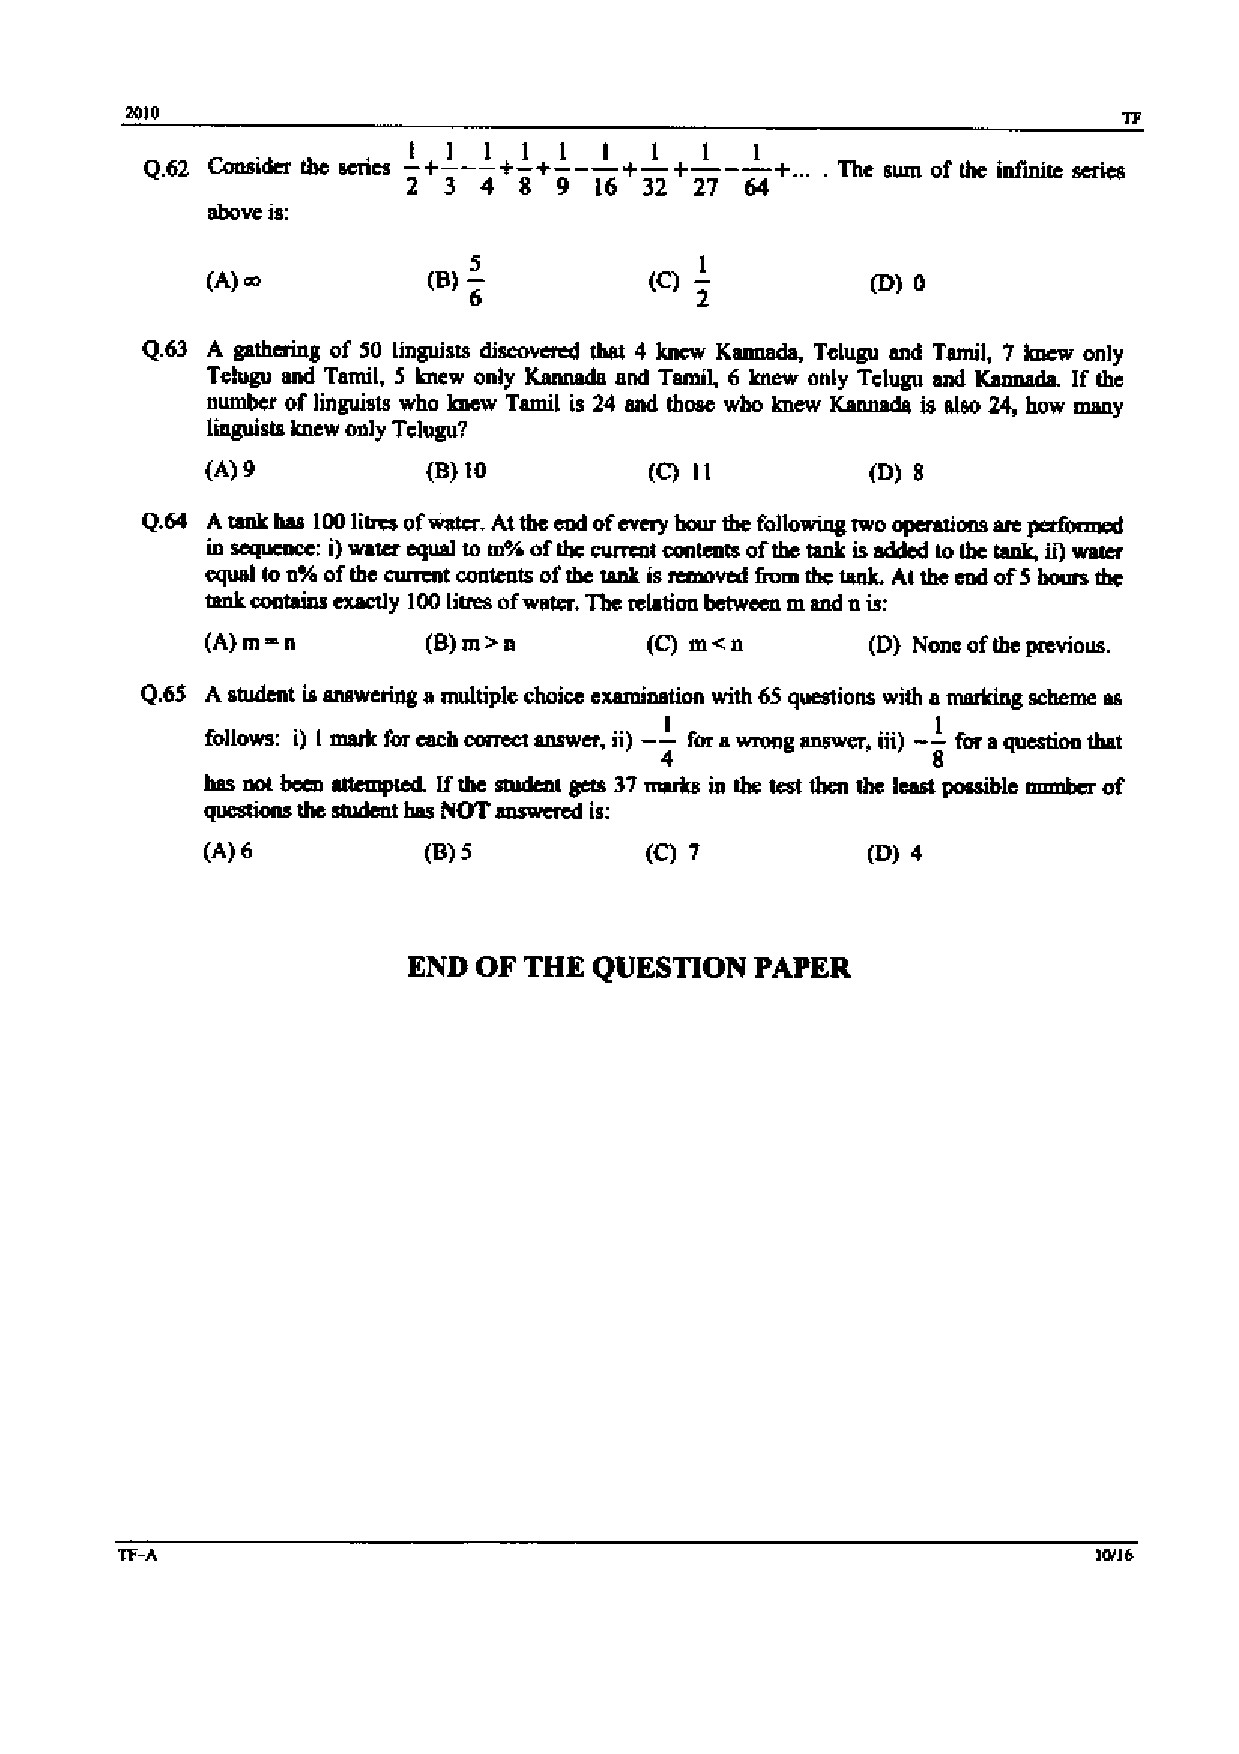 GATE Exam Question Paper 2010 Textile Engineering and Fibre Science 10